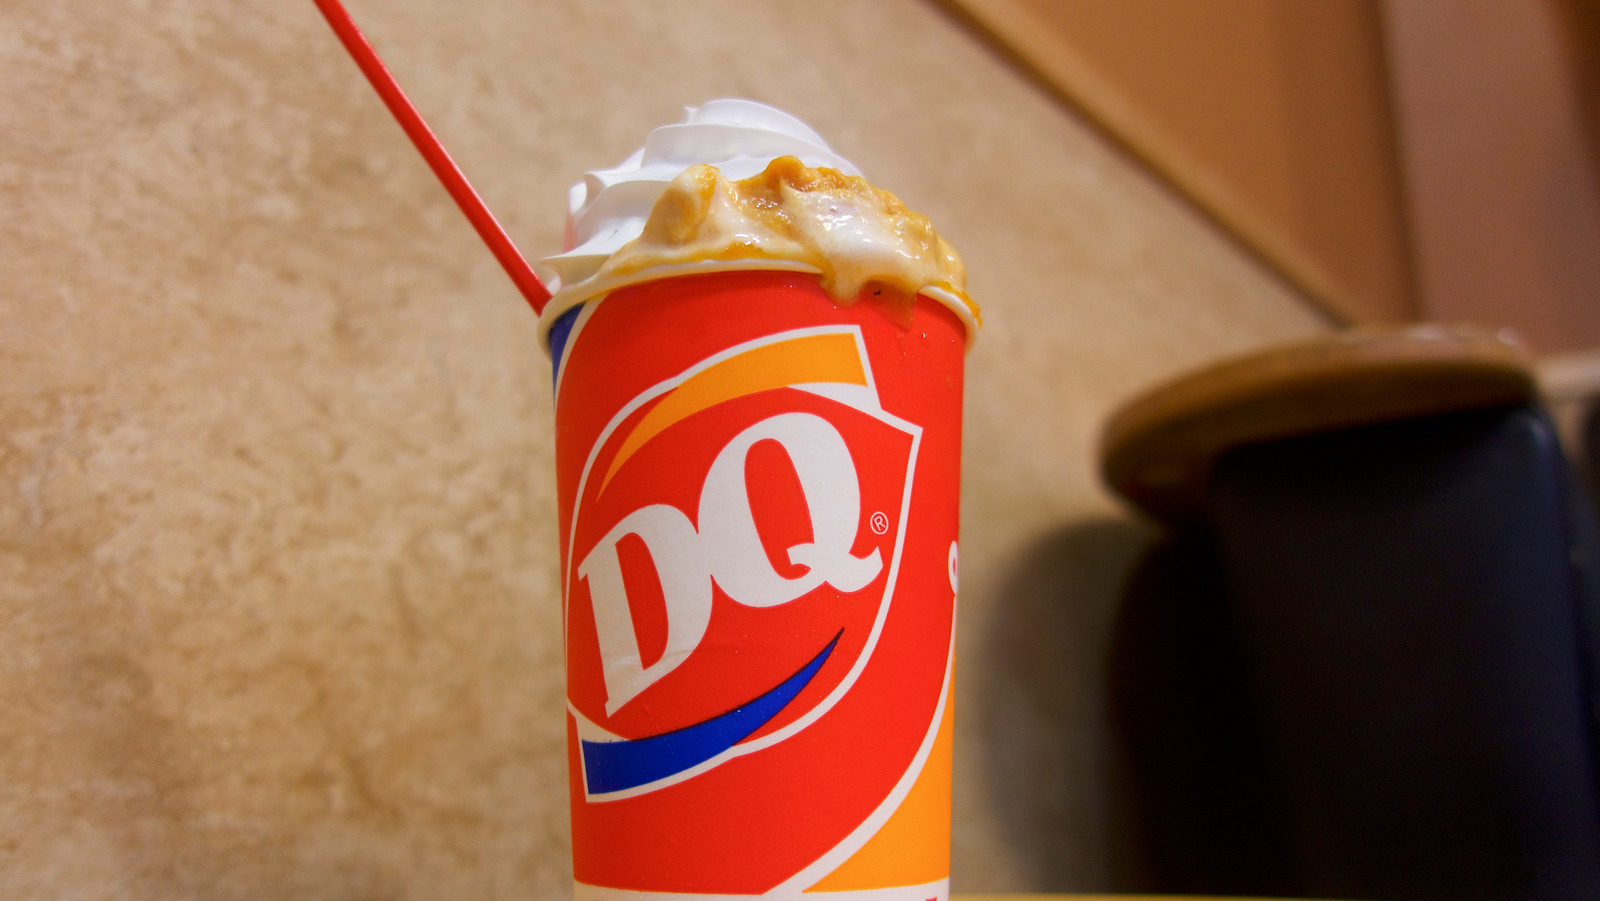 https://www.mashed.com/img/gallery/what-it-was-really-like-to-eat-at-the-first-dairy-queen/l-intro-1678819617.jpg